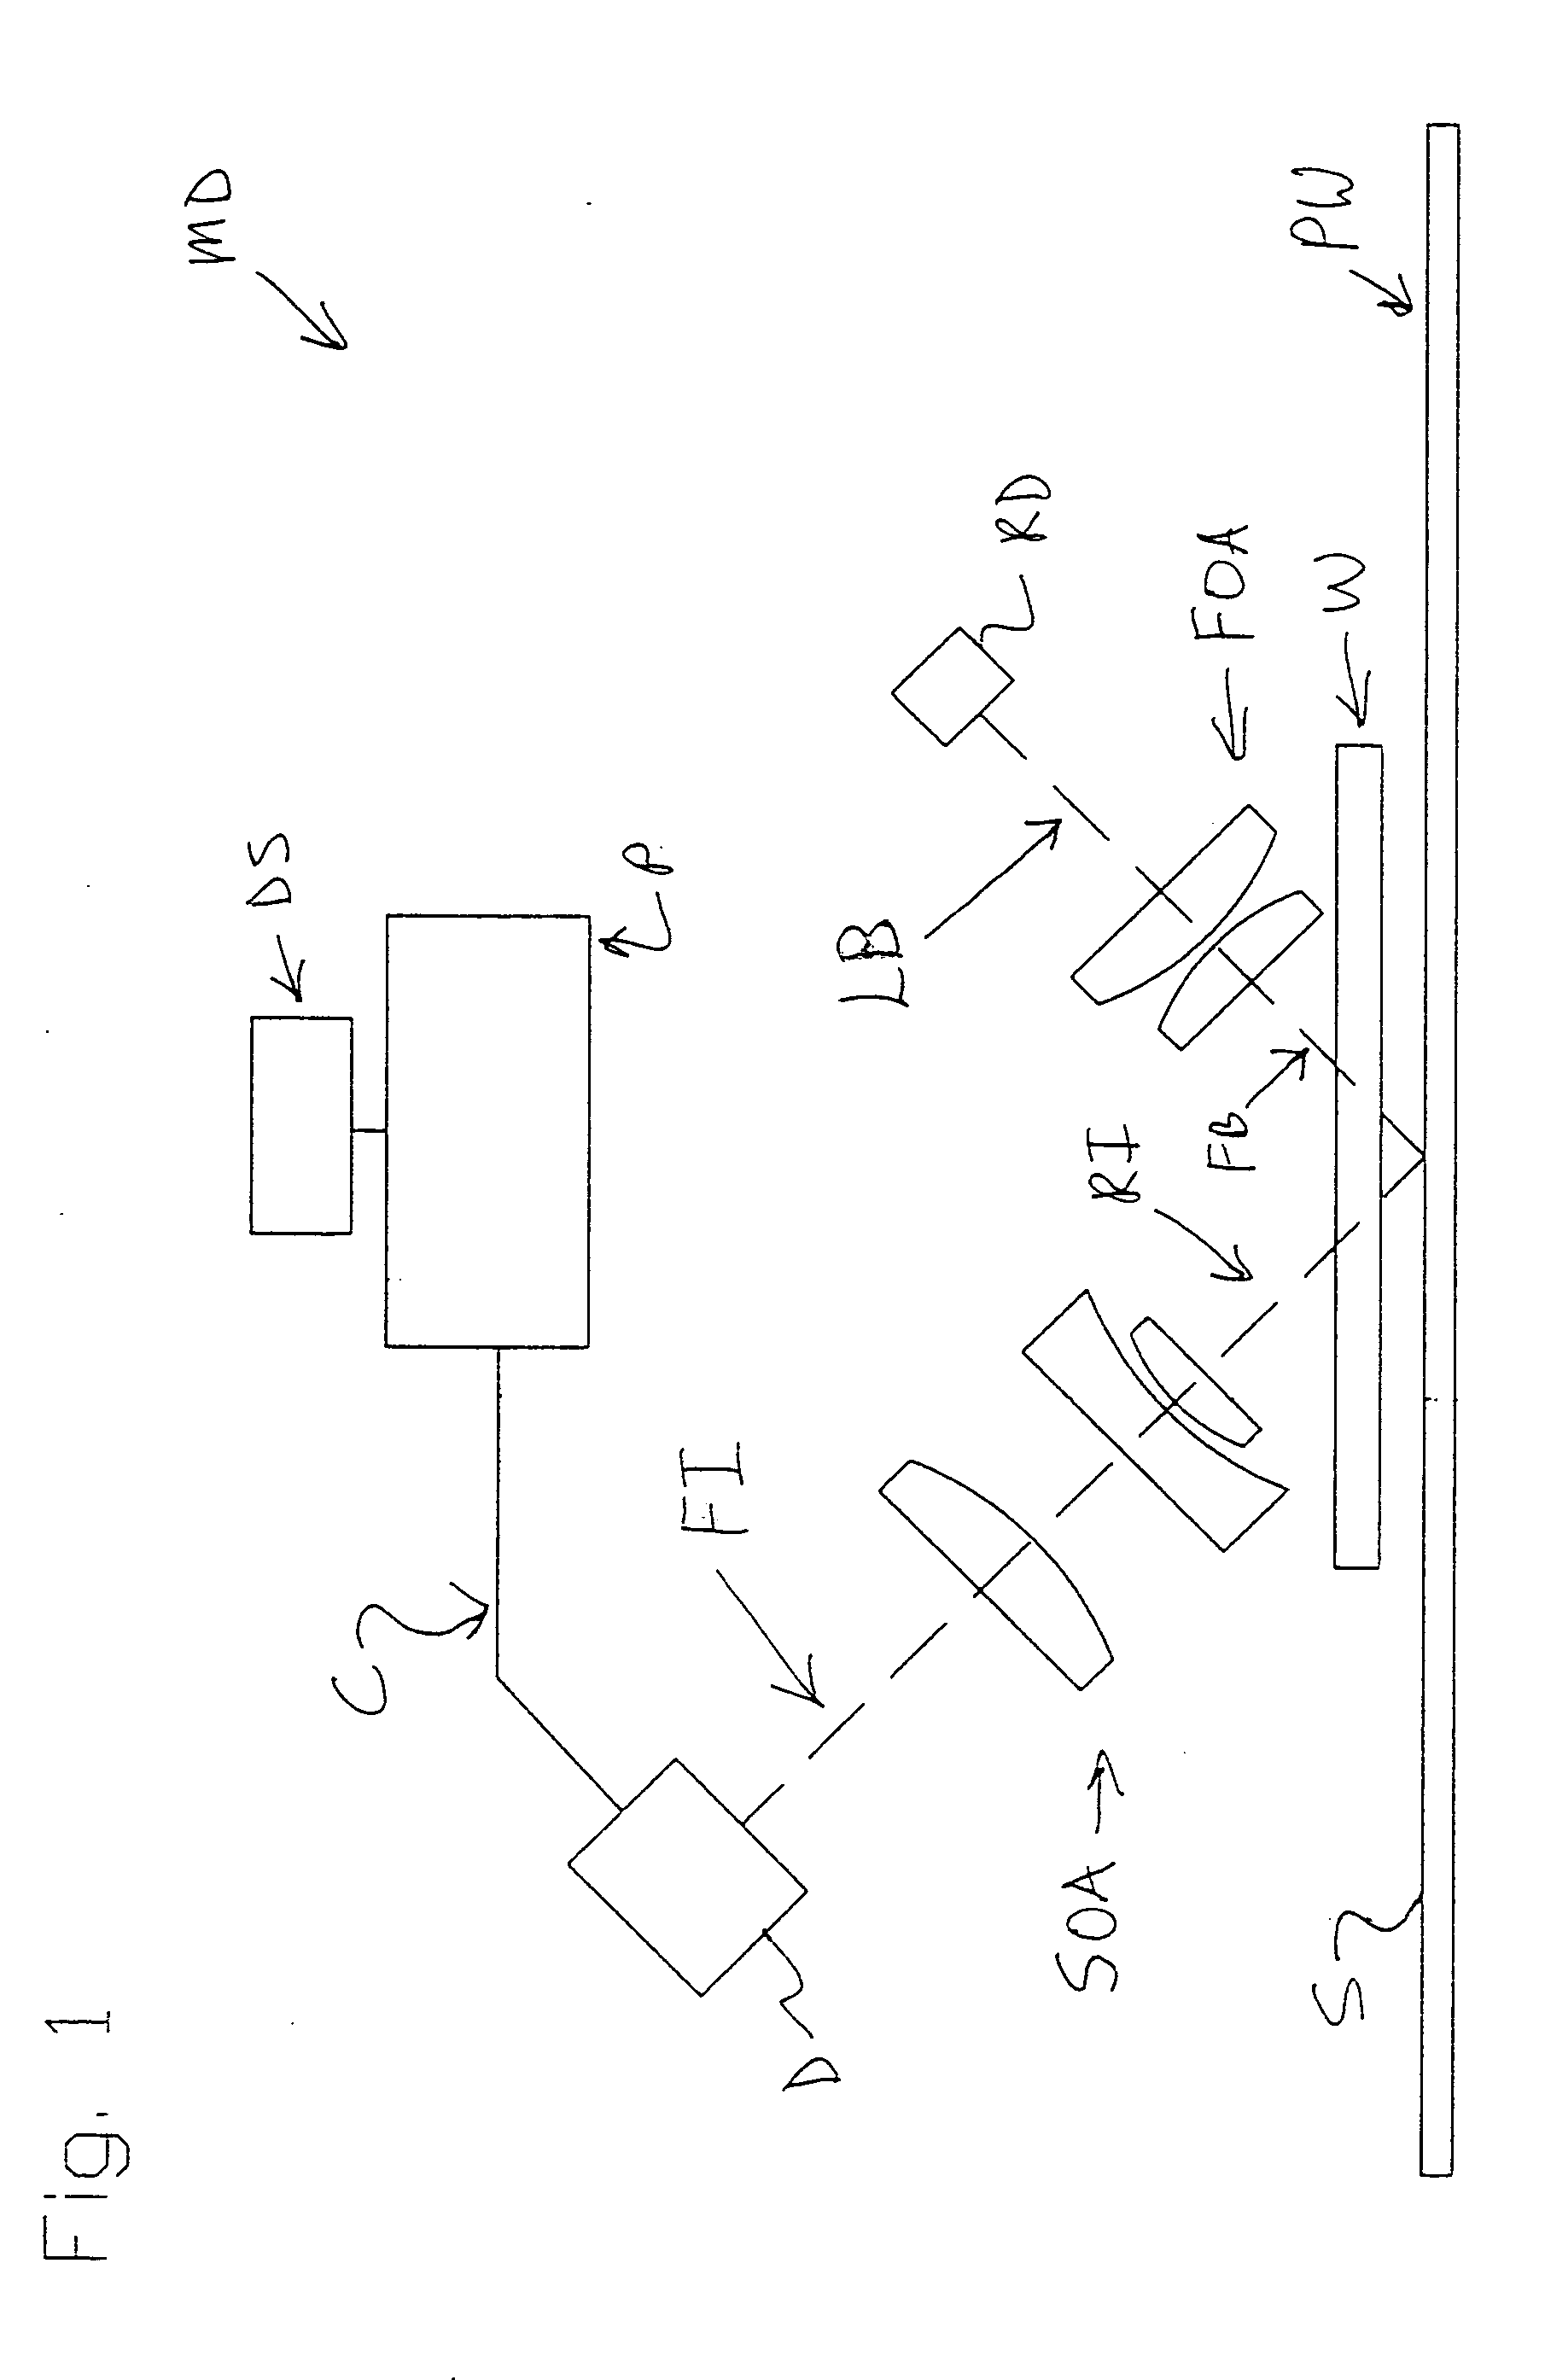 Optical triangulation device and method of measuring a variable of a web using the device